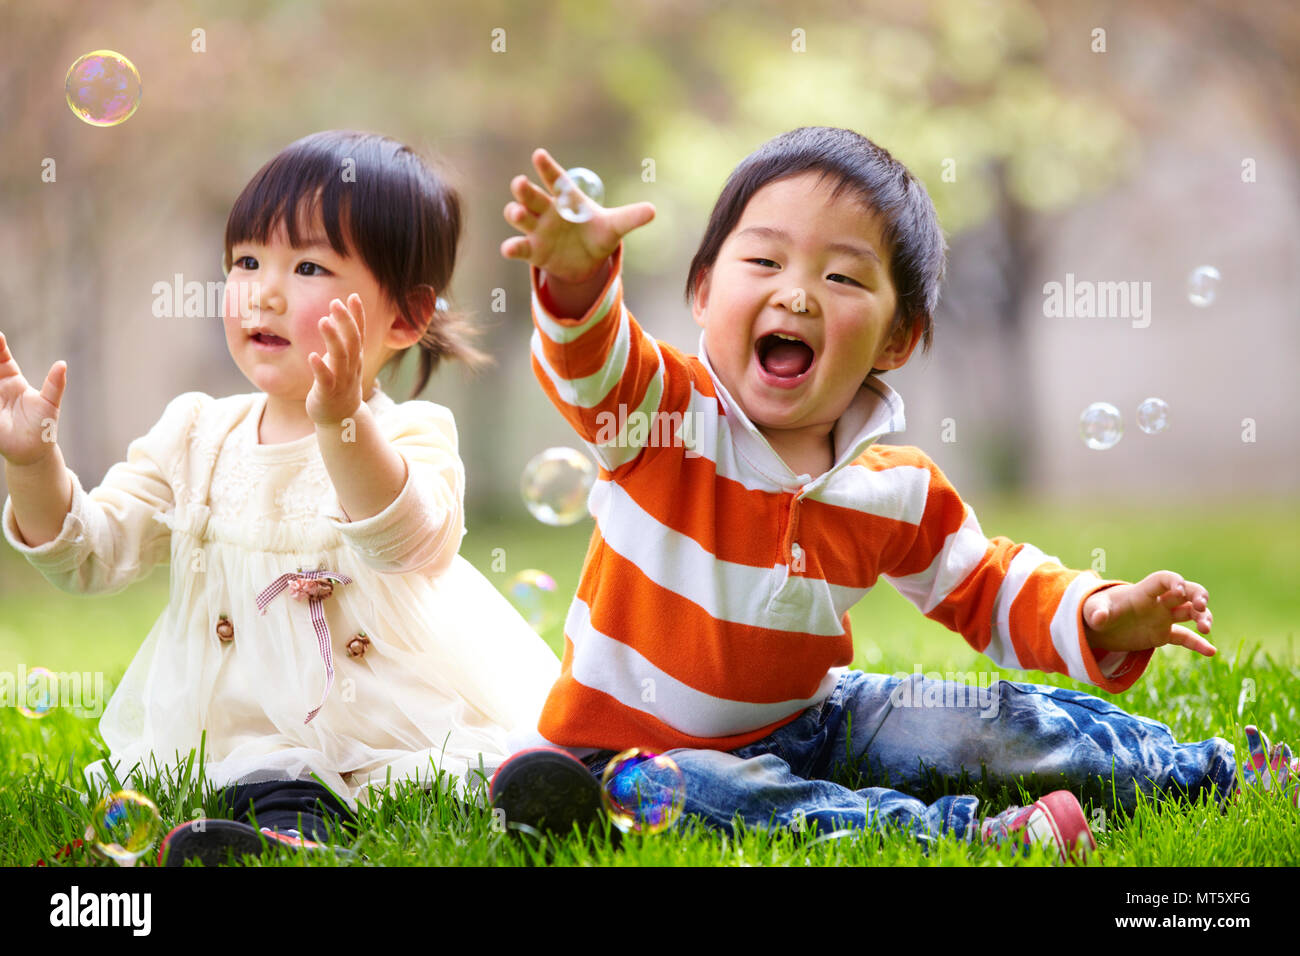 330,089 Asian Children Playing Images, Stock Photos, 3D objects, & Vectors